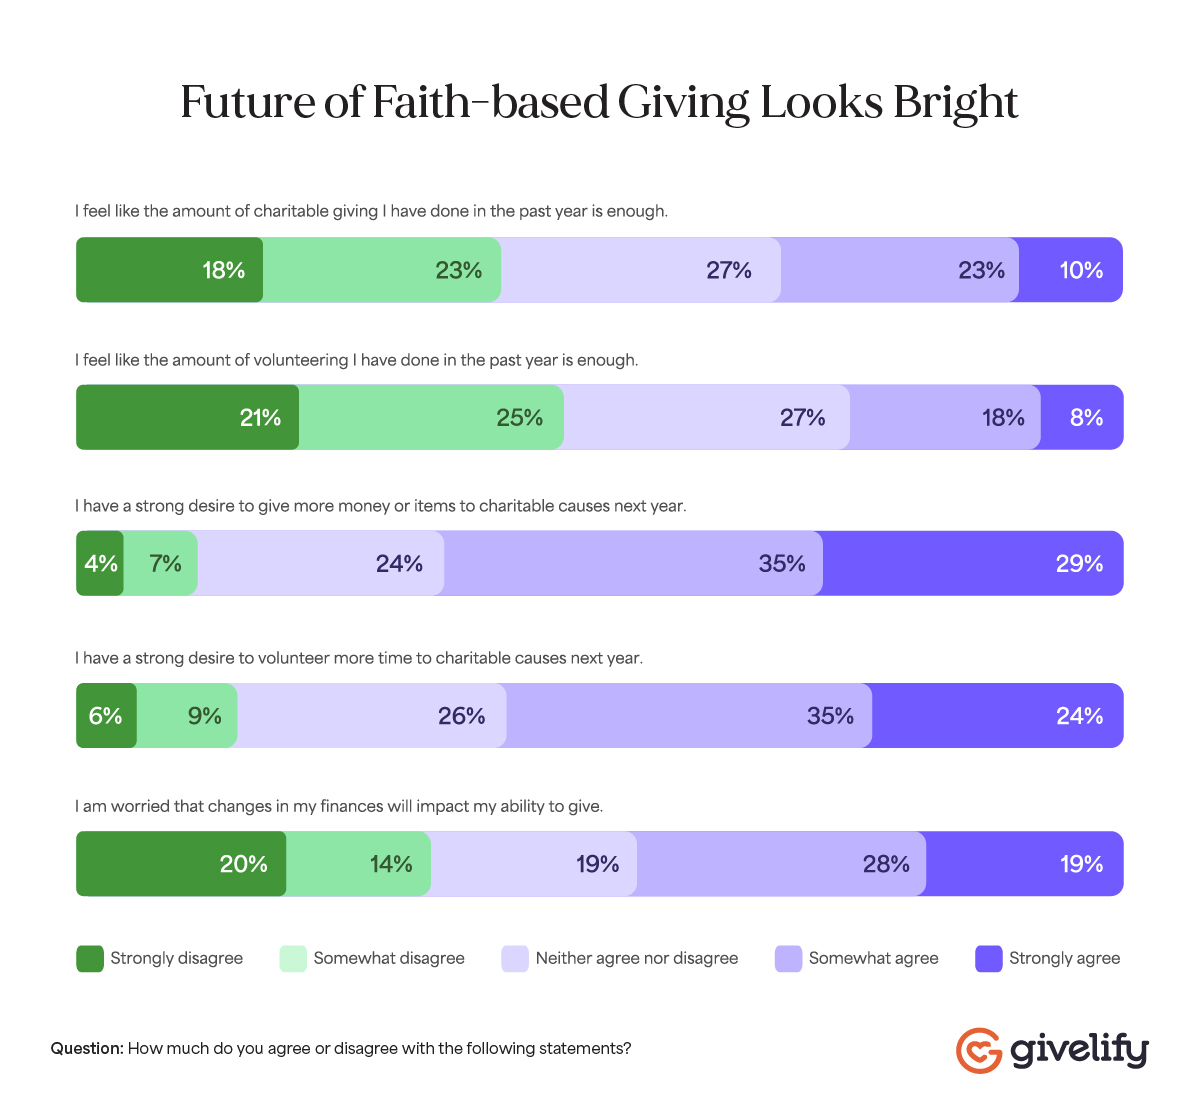 "Future of Faith Based Giving Looks Bright" (Graphic courtesy Givelify)